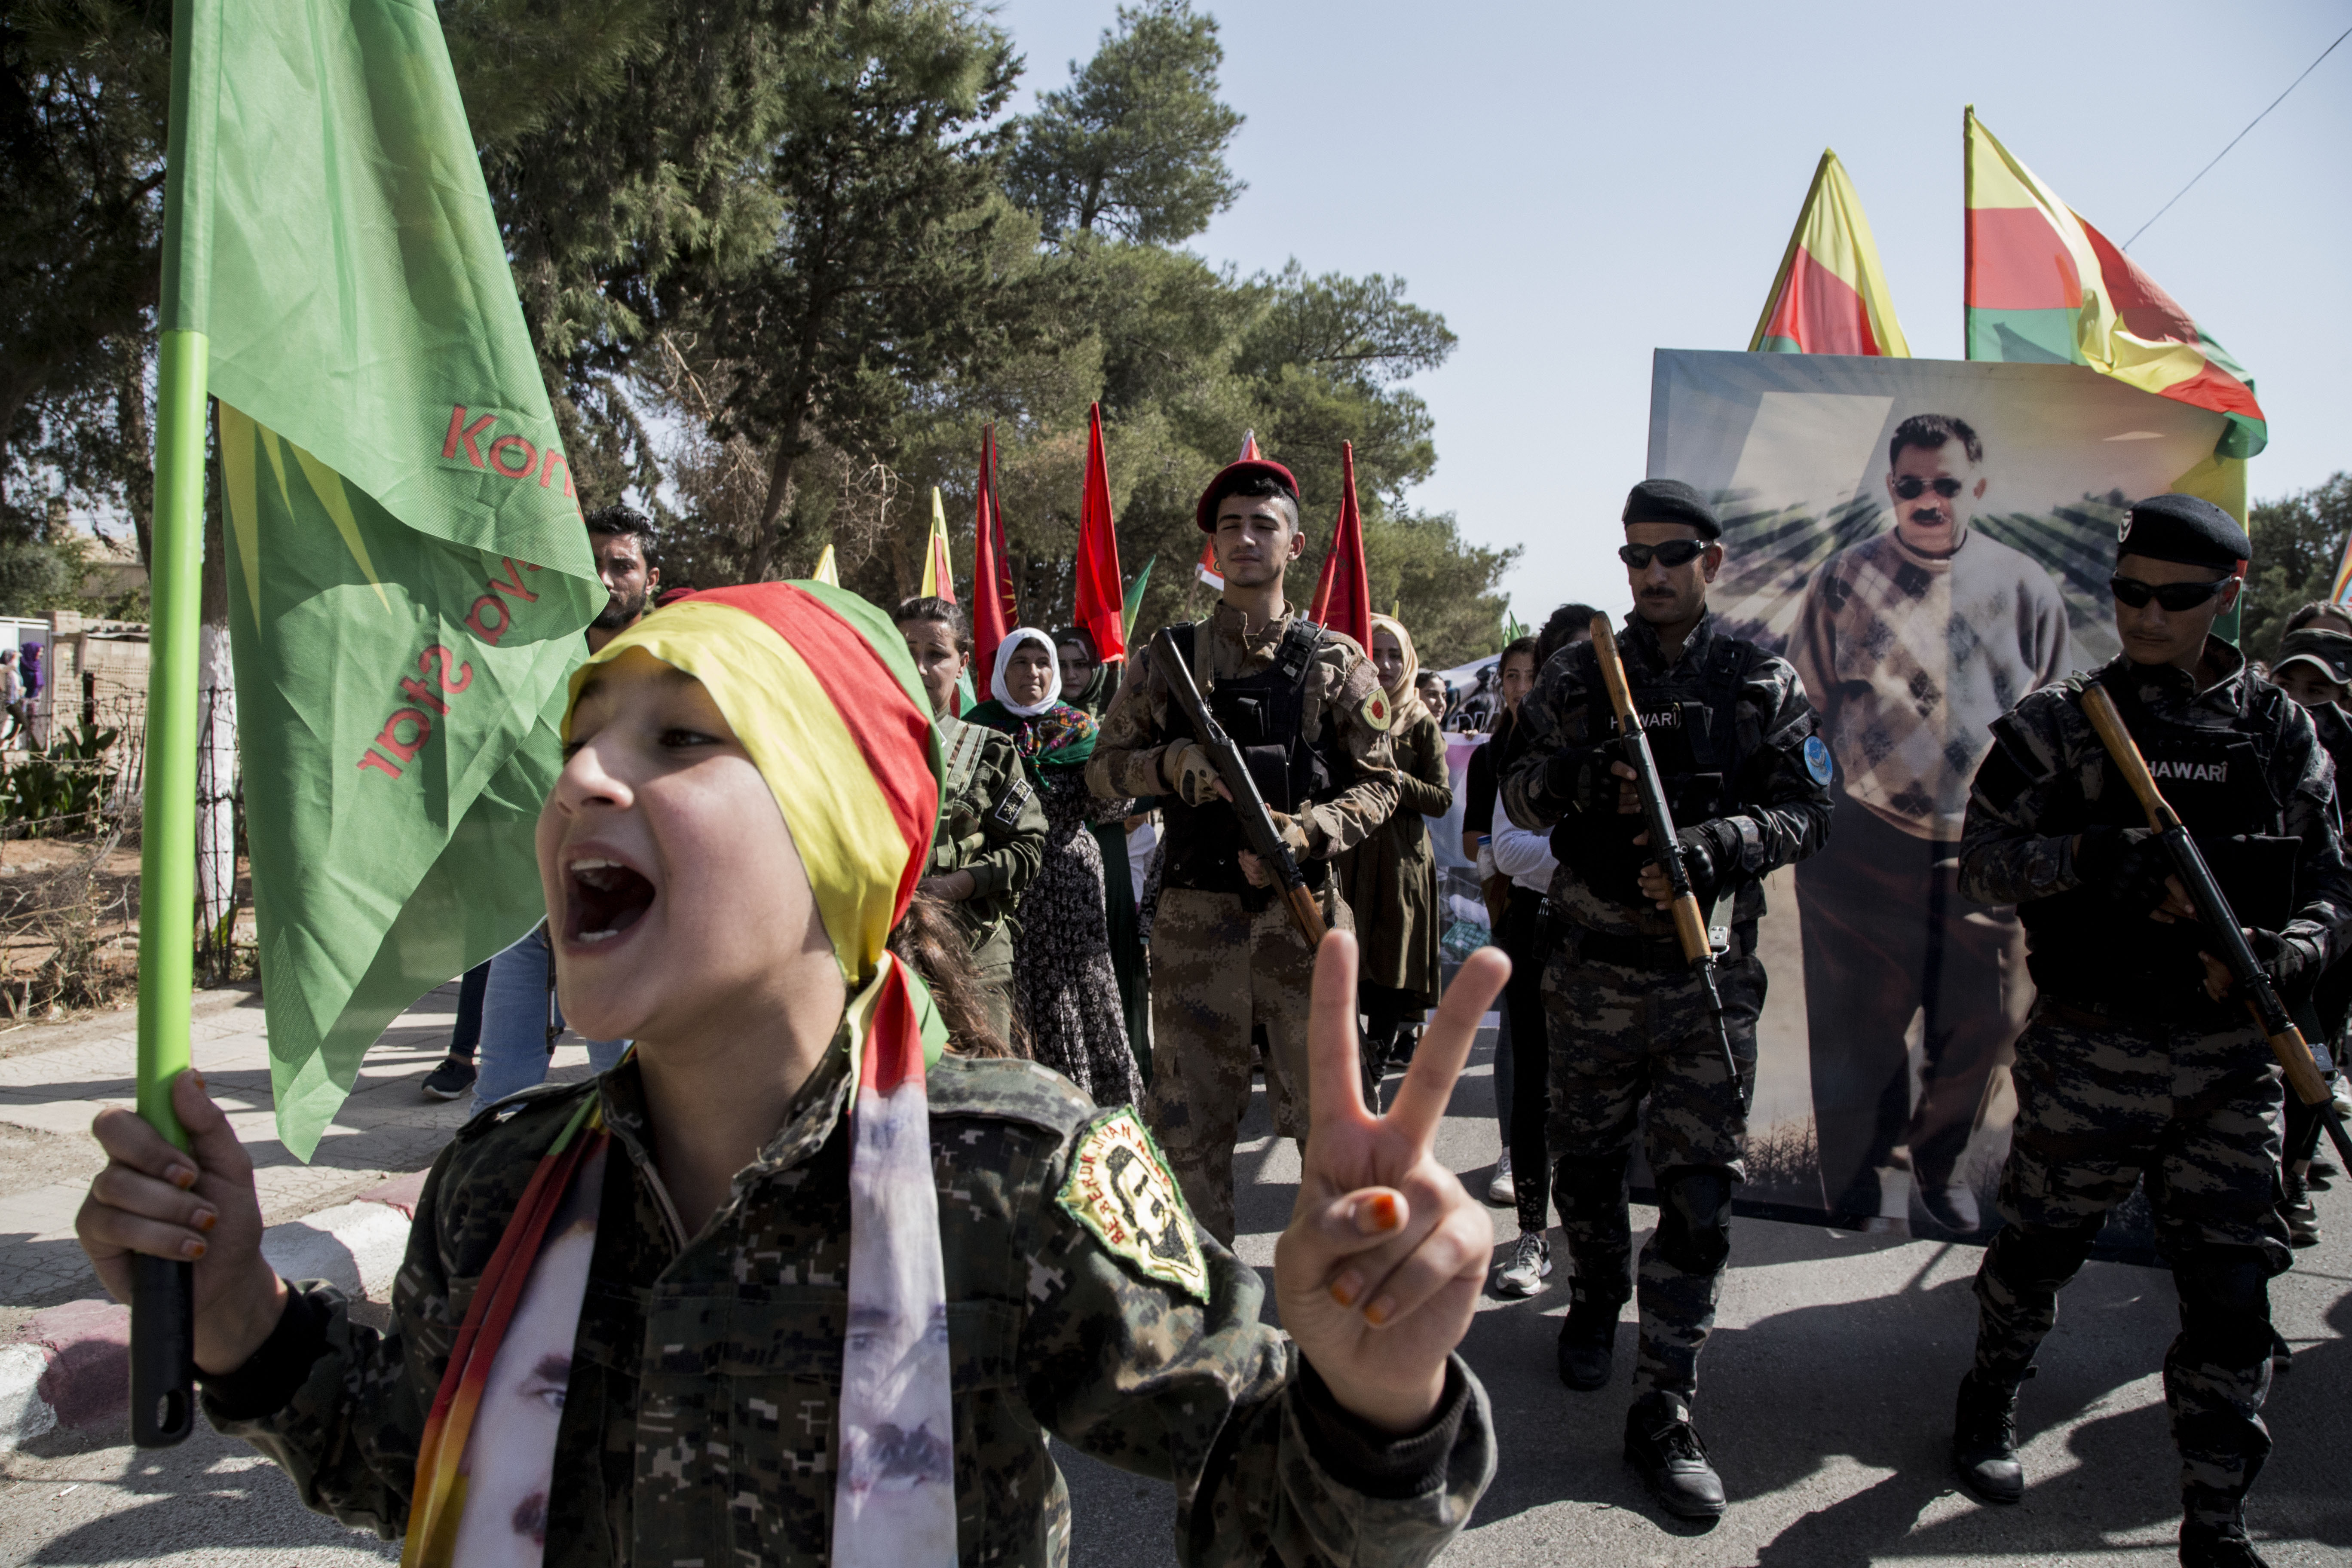 Fighters of the Syrian Democratic Forces, SDF, march during a demonstration against possible Turkish military operation in their areas in Al-Qahtaniya, Syria, Monday, Oct. 7, 2019. Syria's Kurds accused the U.S. of turning its back on its allies and risking gains made in the fight against the Islamic State group as American troops began pulling back on Monday from positions in northeastern Syria ahead of an expected Turkish assault. (AP Photo/Baderkhan Ahmad)